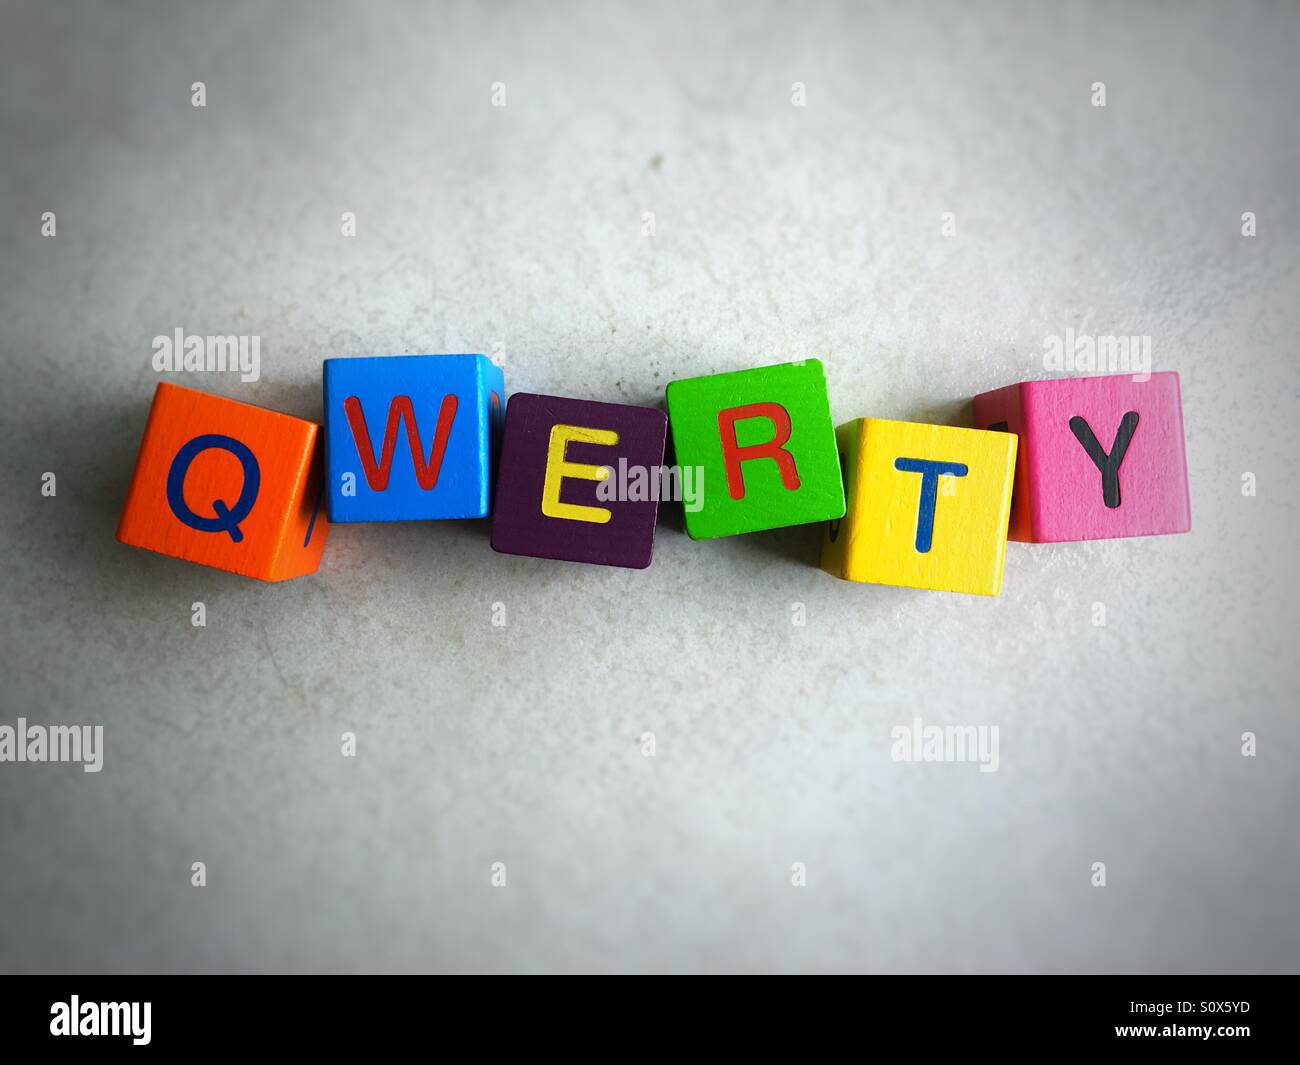 QWERTY,forest letters on keyboard ,frequent password Stock Photo